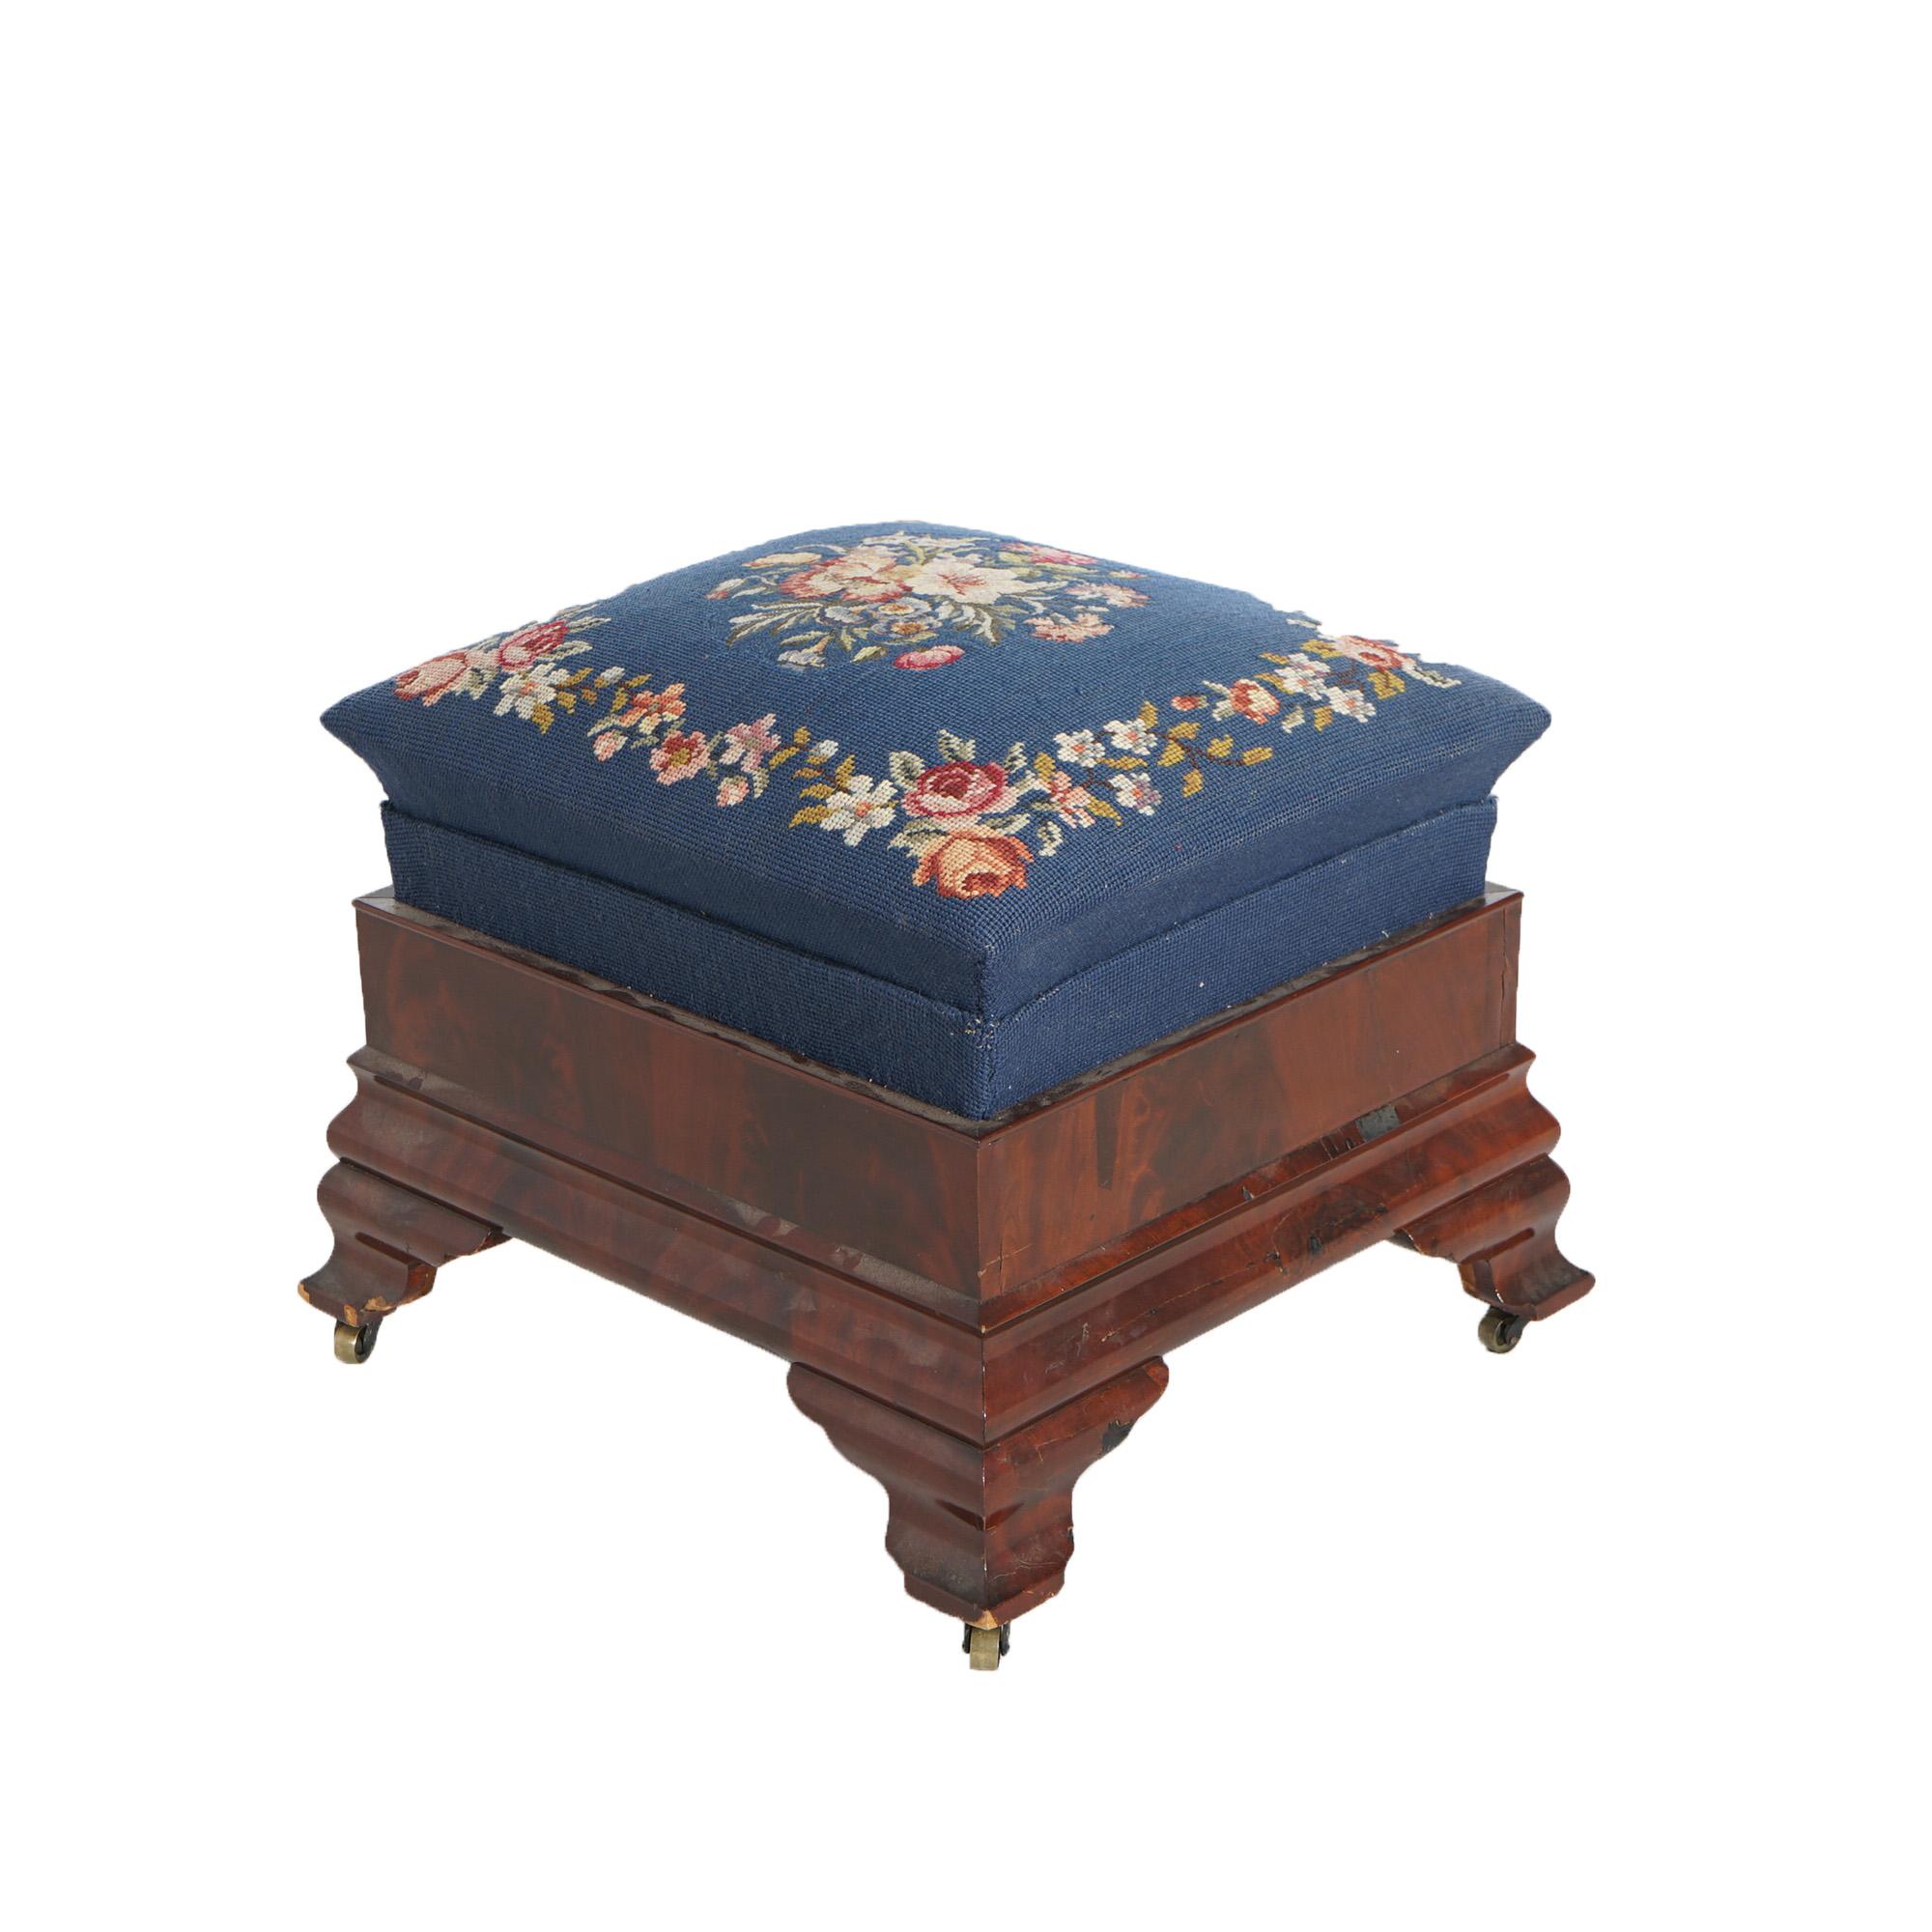 Antique American Empire Classical Greco Flame Mahogany Needlepoint Stool 19thC For Sale 3